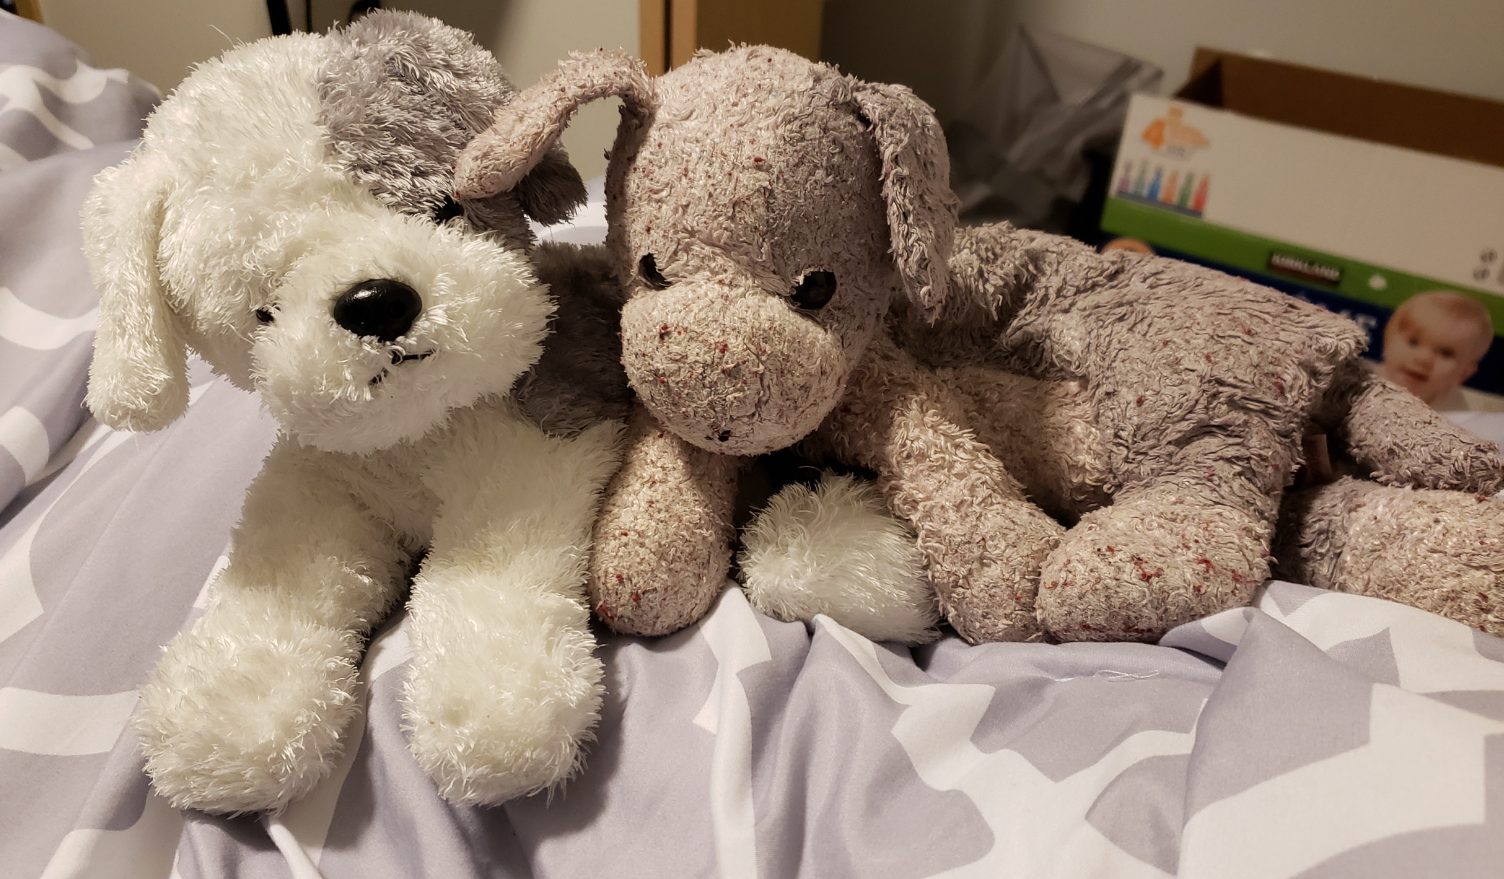 Two stuffed toys on a bed